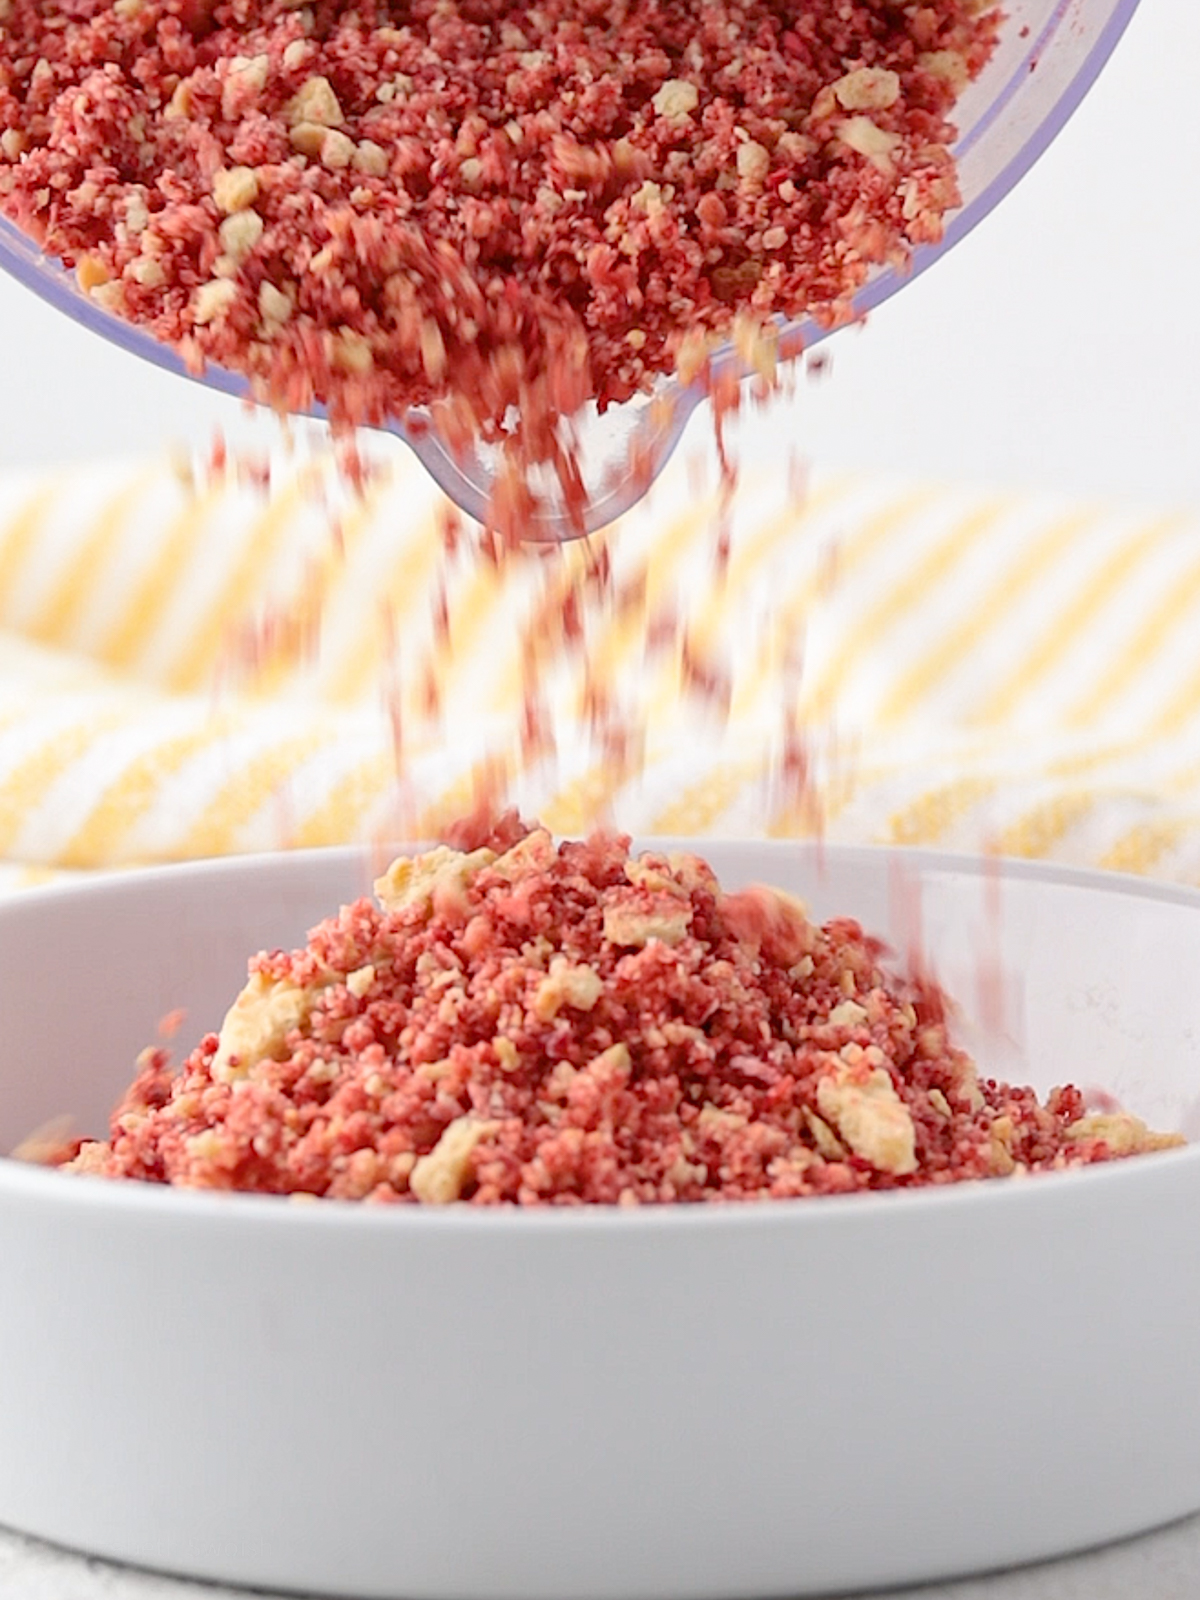 Pouring Strawberry Crunch Crumble into a dish.